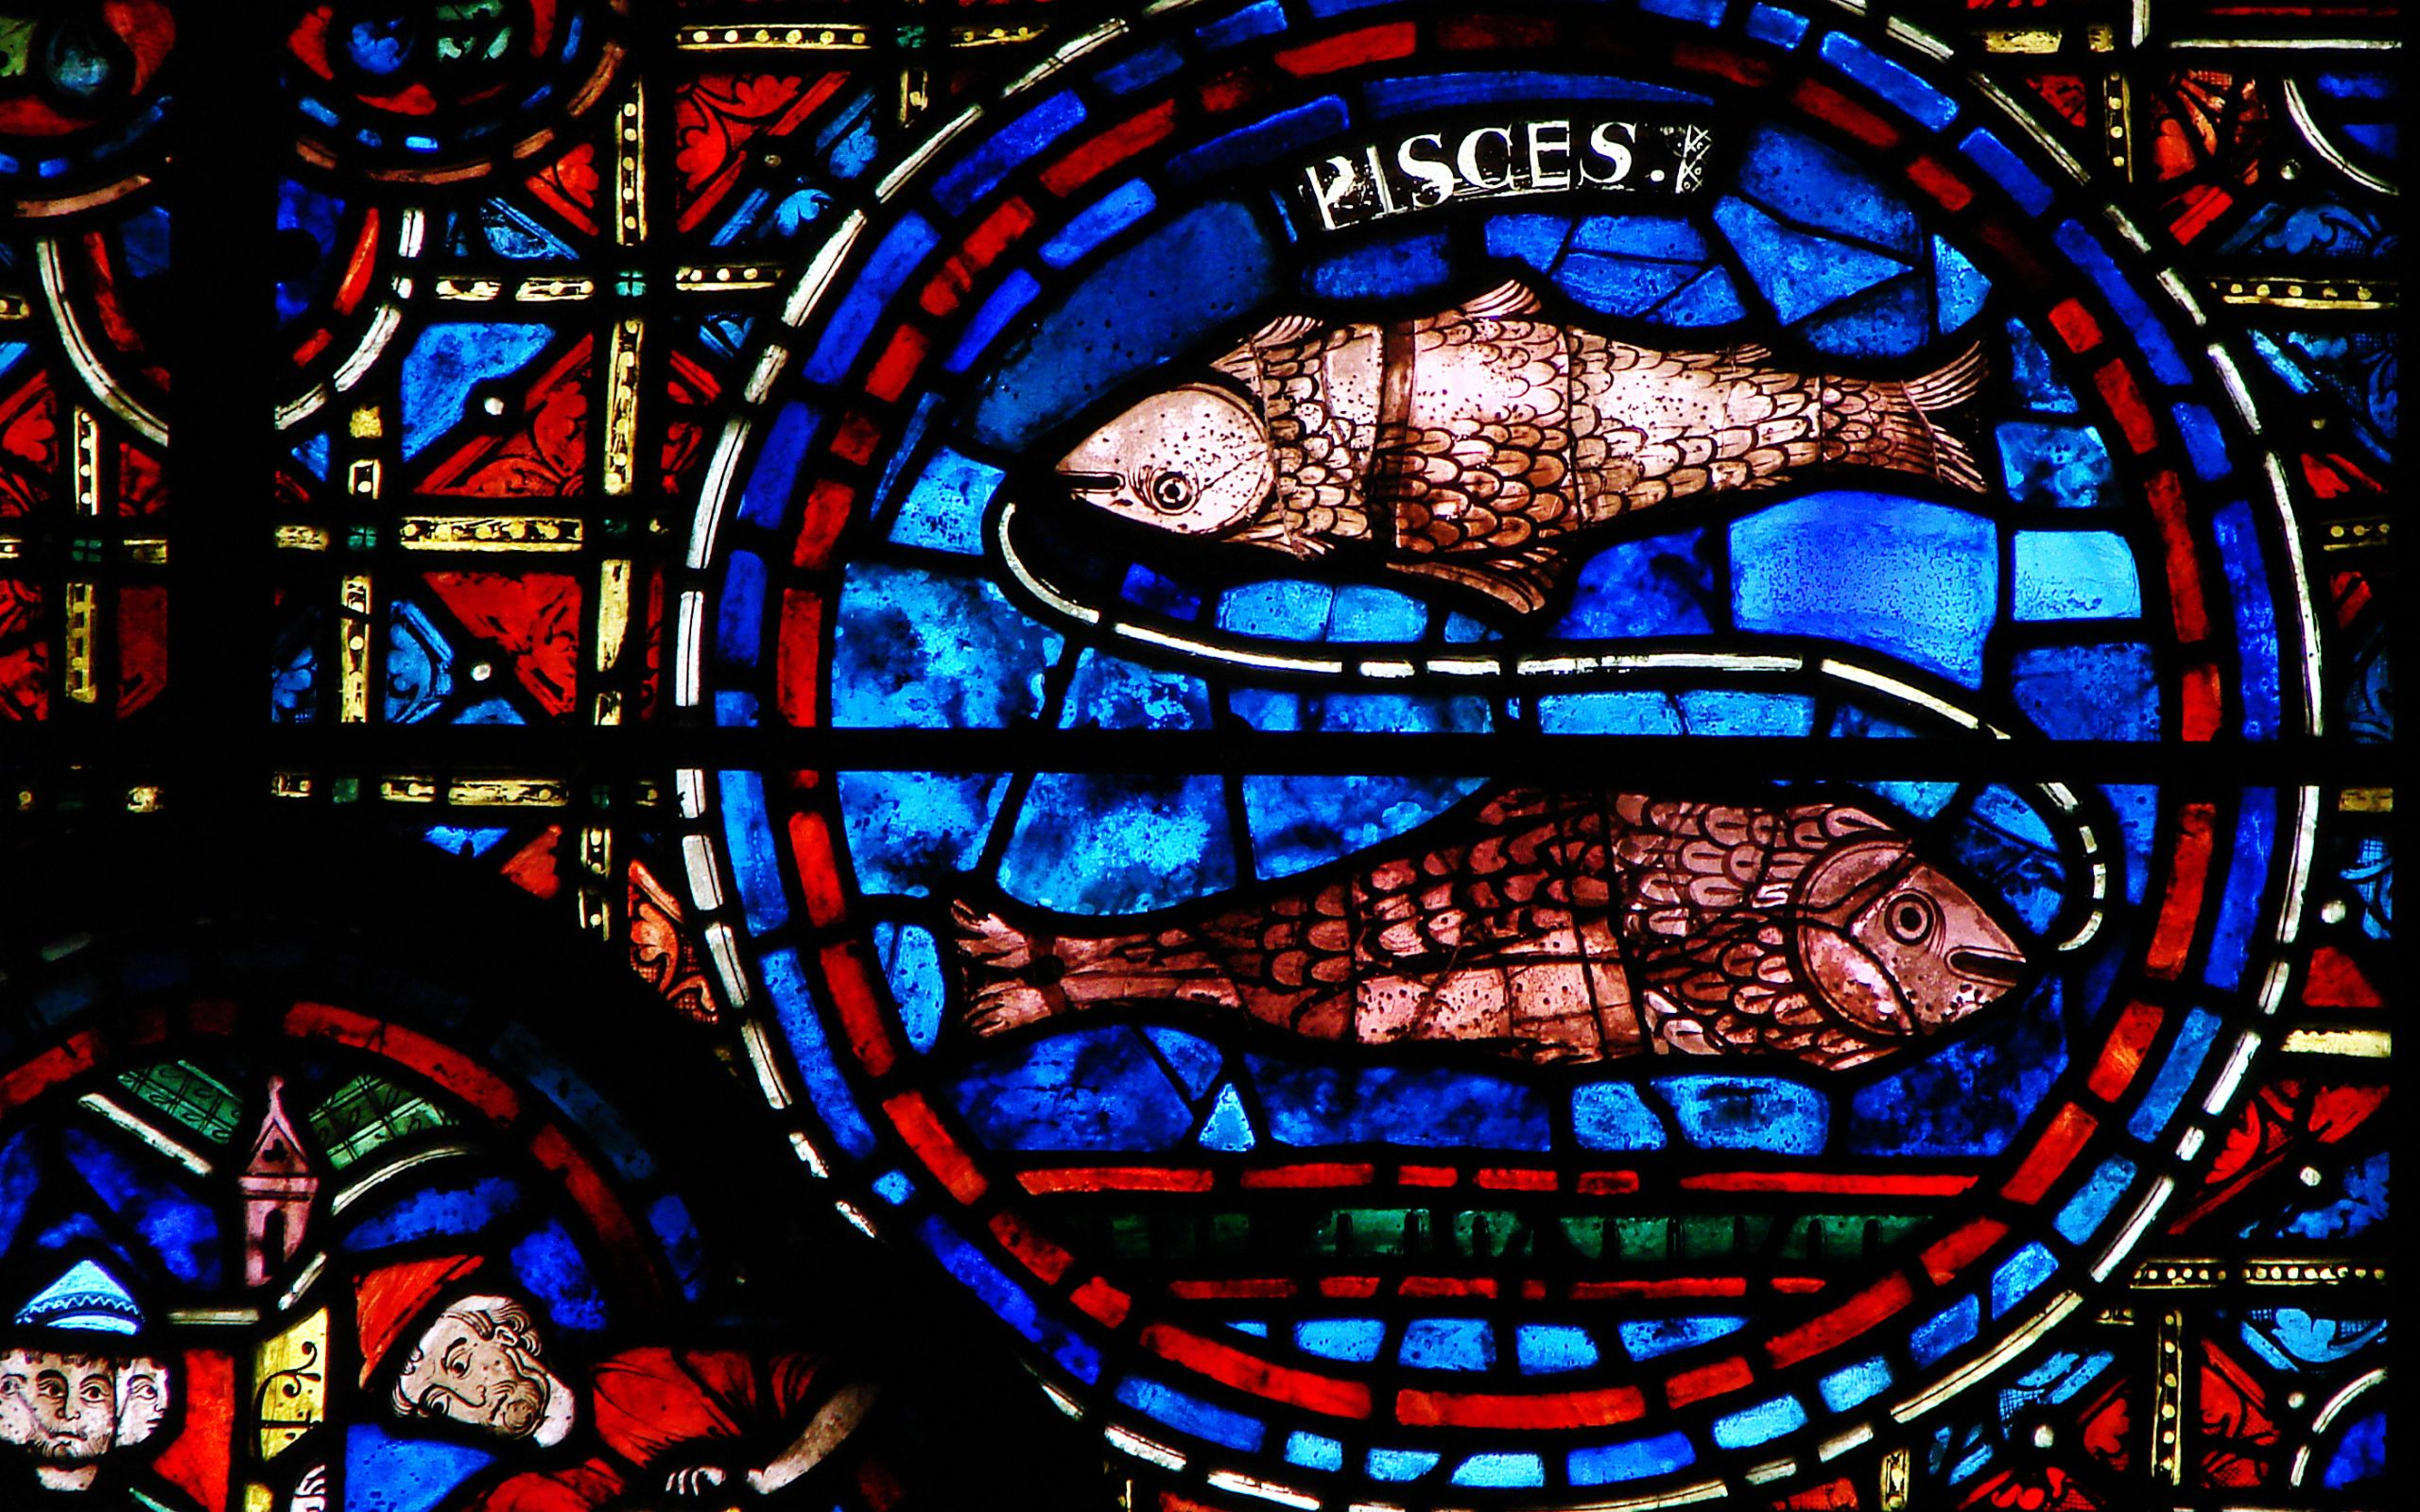 2560x1600 Pisces, stained glass Desktop wallpapers | Chartres, Medieval stained glass, Astrology pisces